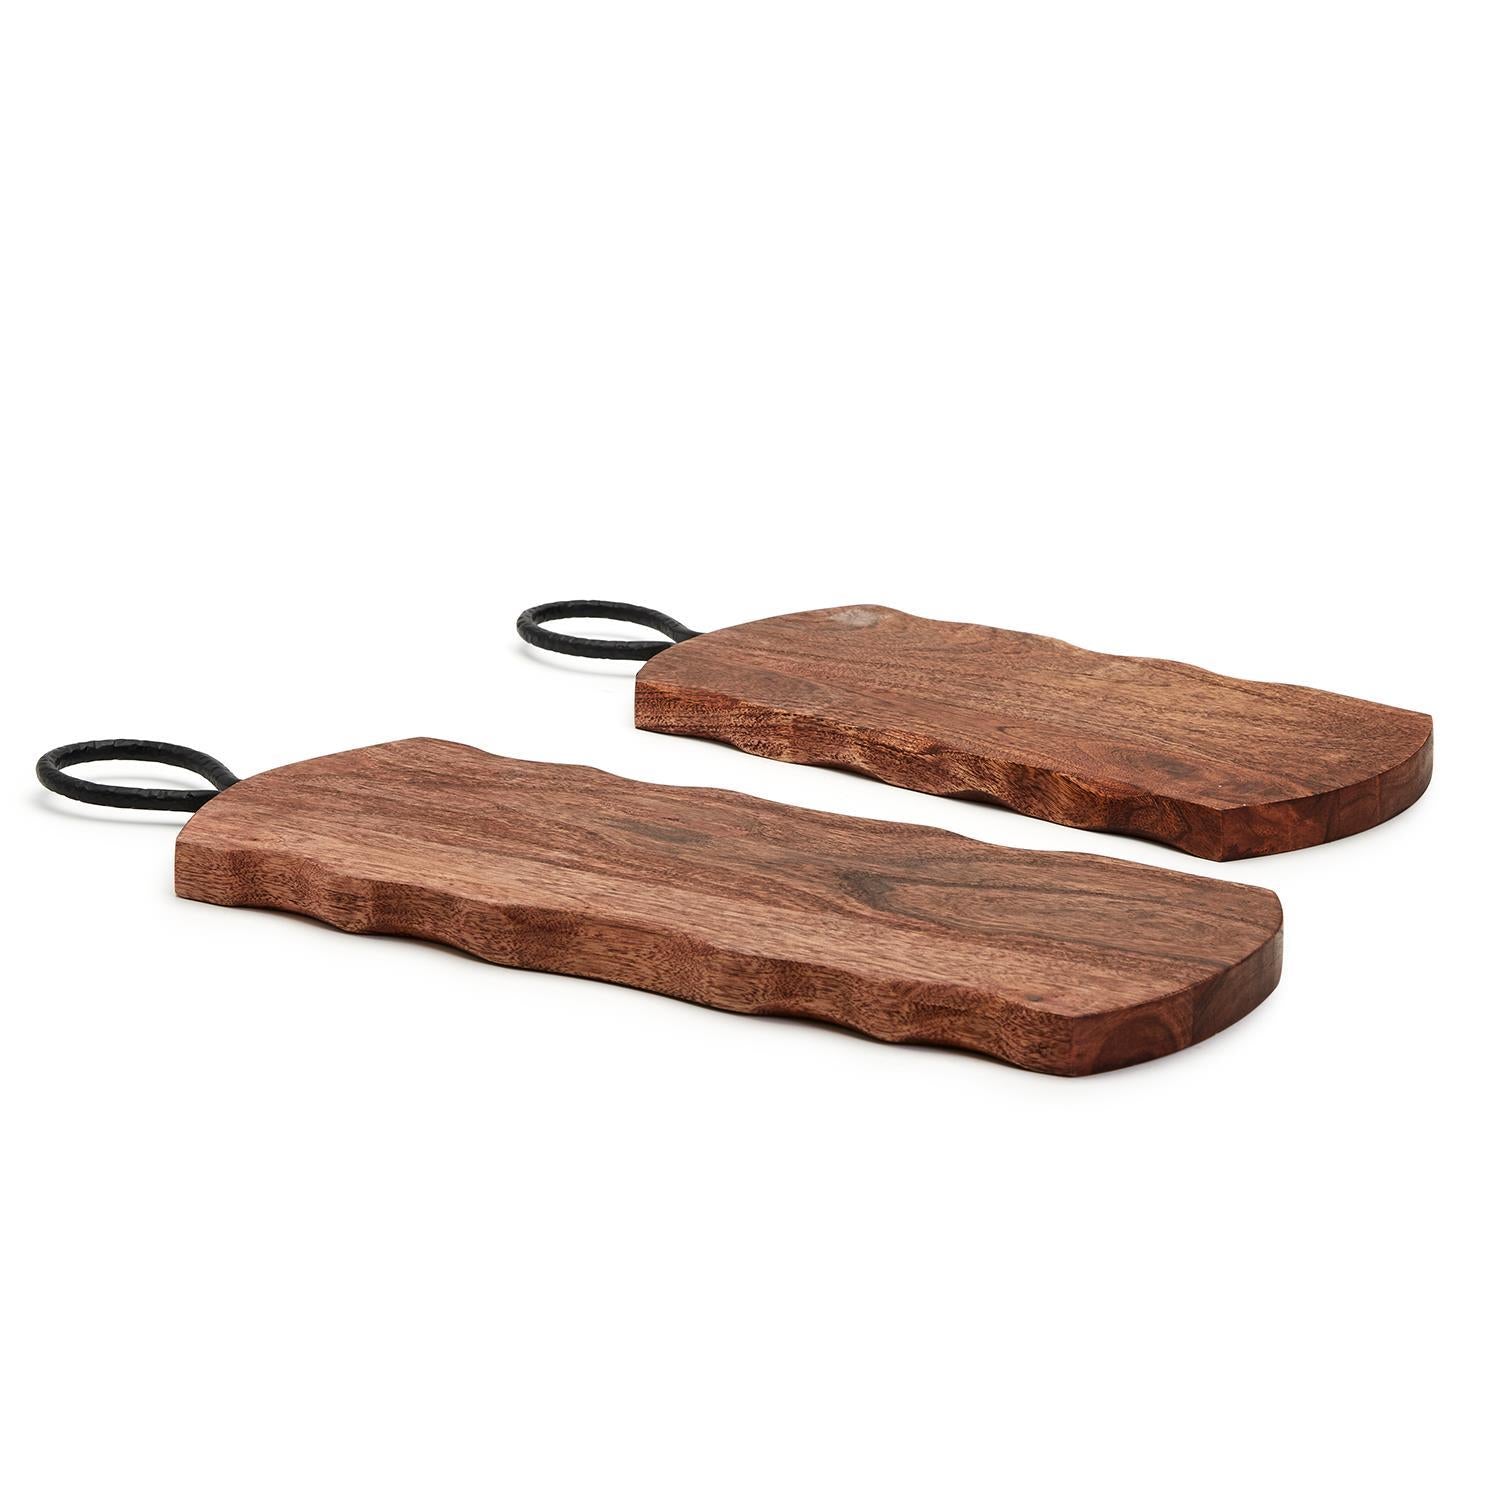 Two's Company Rustic Edge S/2 Serving Boards w/Hammered Iron Handle